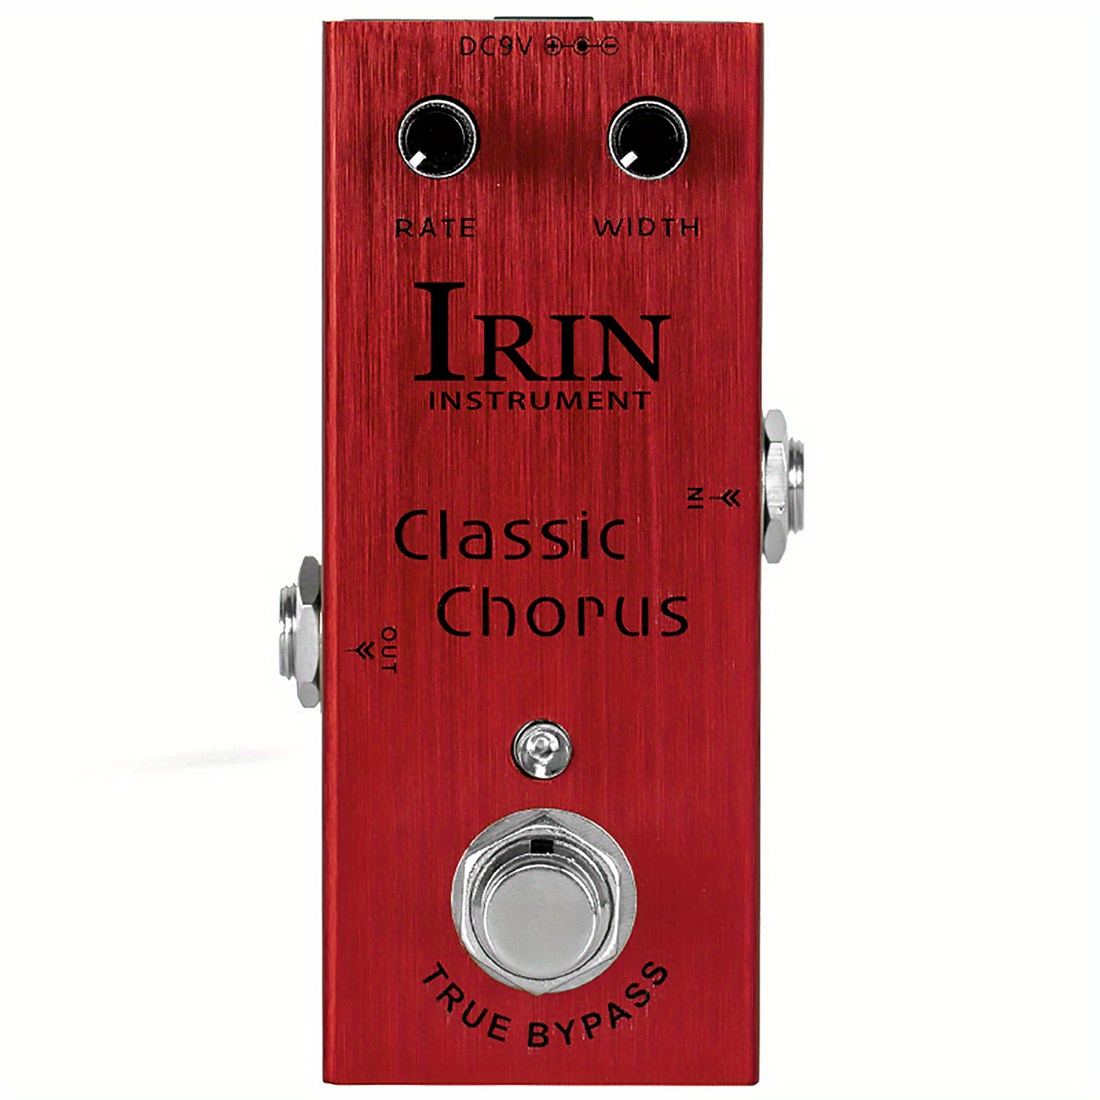 Guitar Effect Pedal IRIN Pedal Professional Effect Pedal Electric